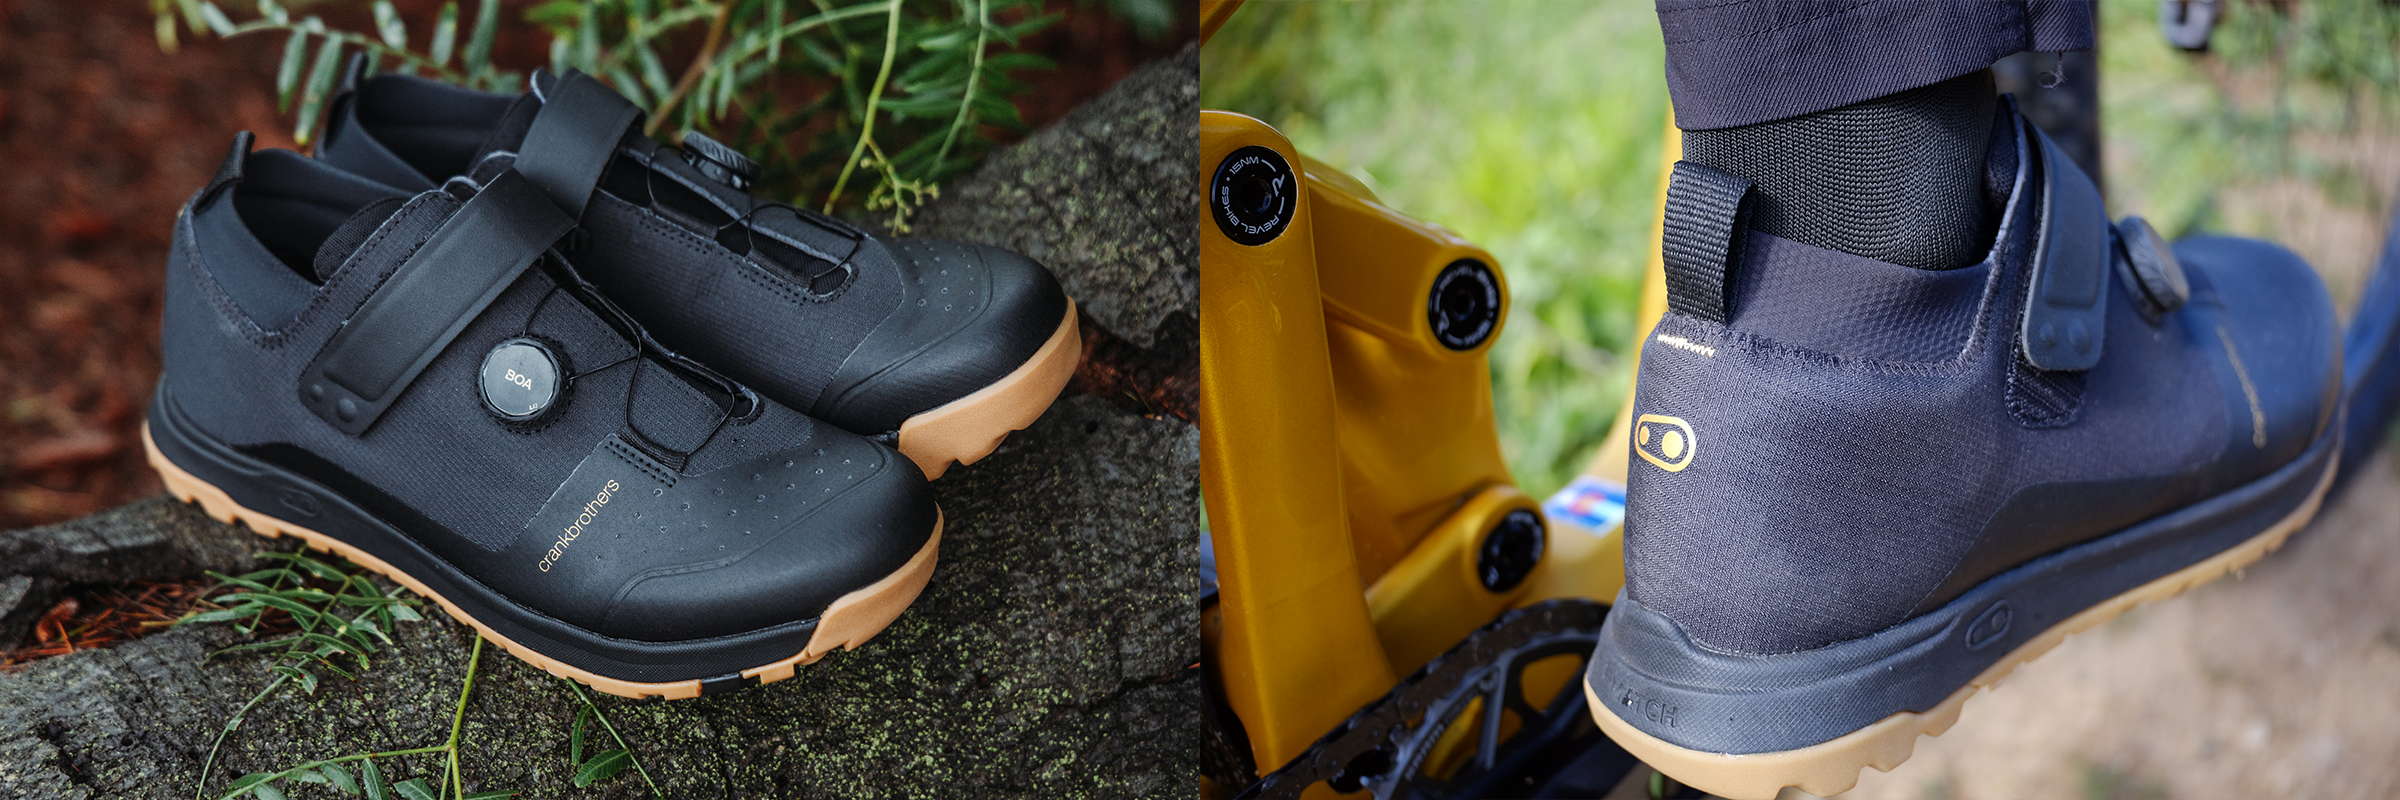 Crank Brothers Stamp & Mallet Trail Shoes